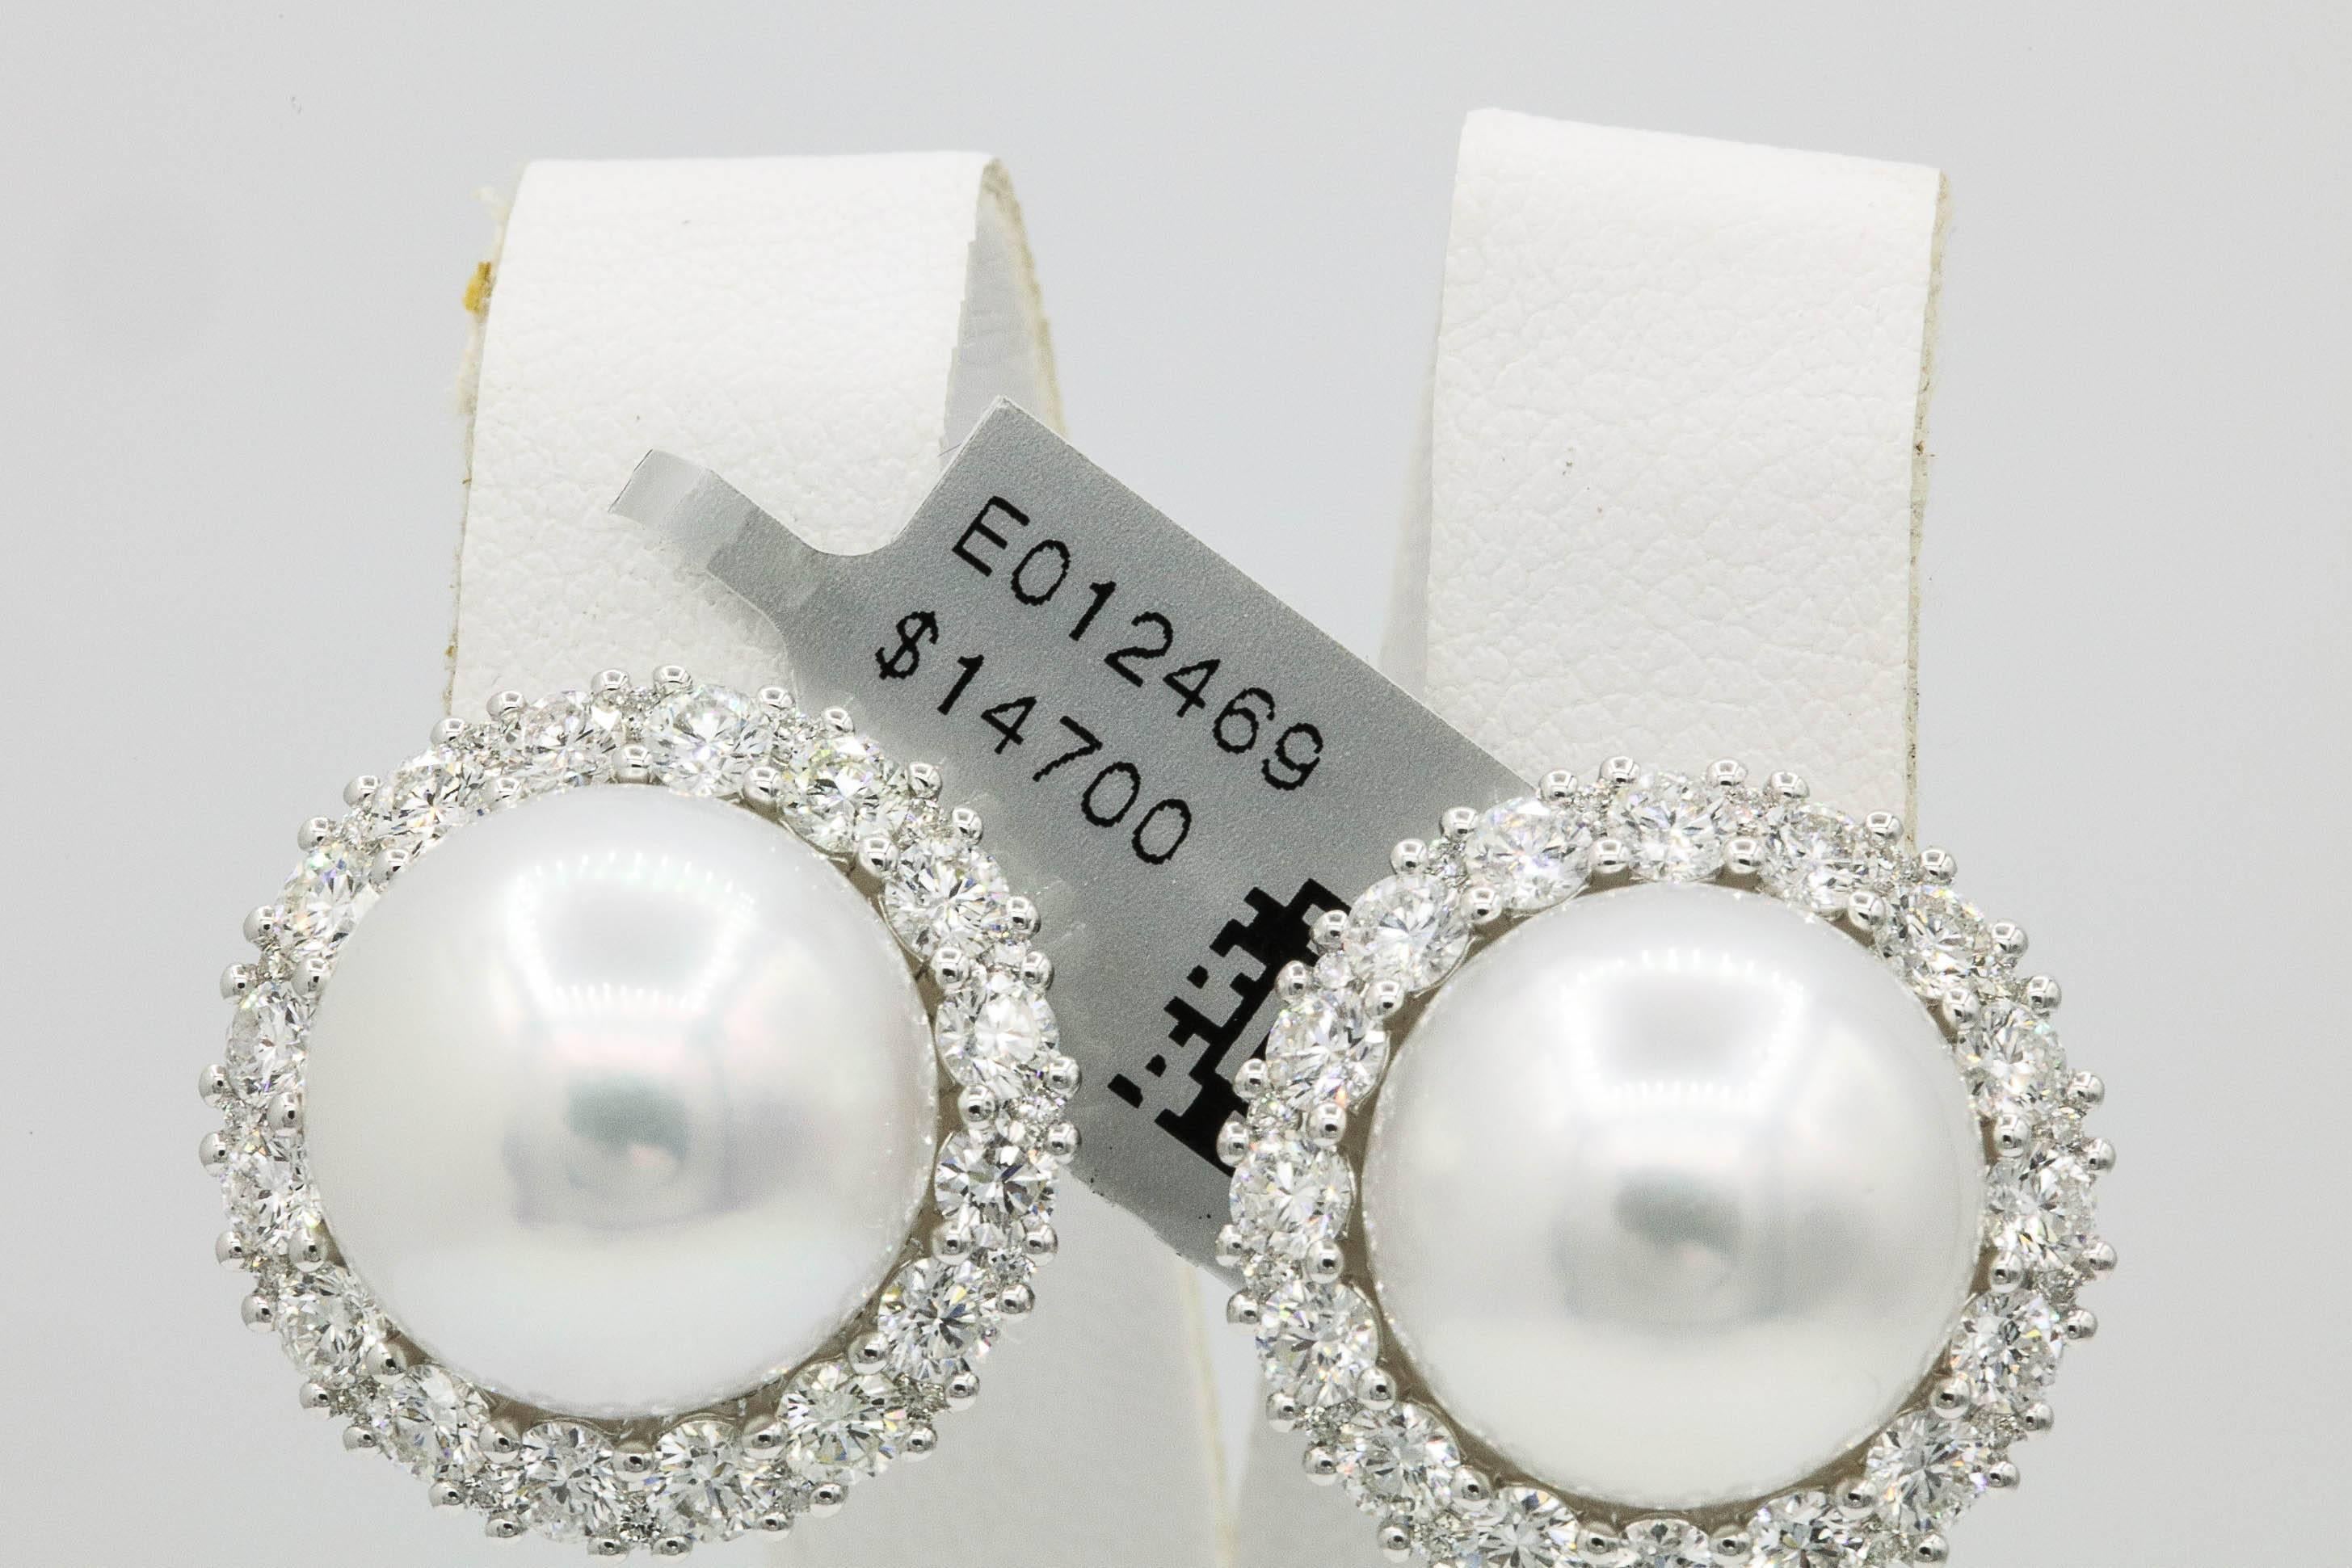 18K White gold earrings featuring two South Sea Pearls measuring 13-14 mm flanked with a diamond halo weighing 2.75 carats. Color G-H Clarity SI